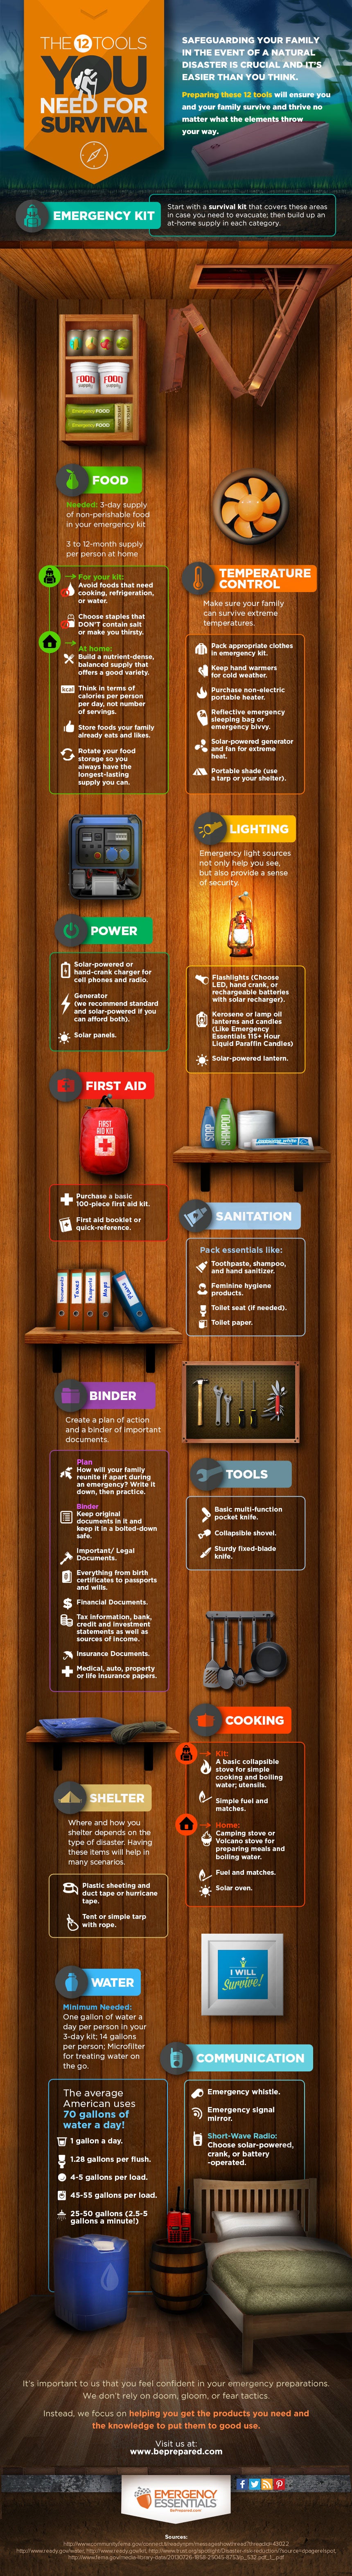 12 tools you need for survival infographic